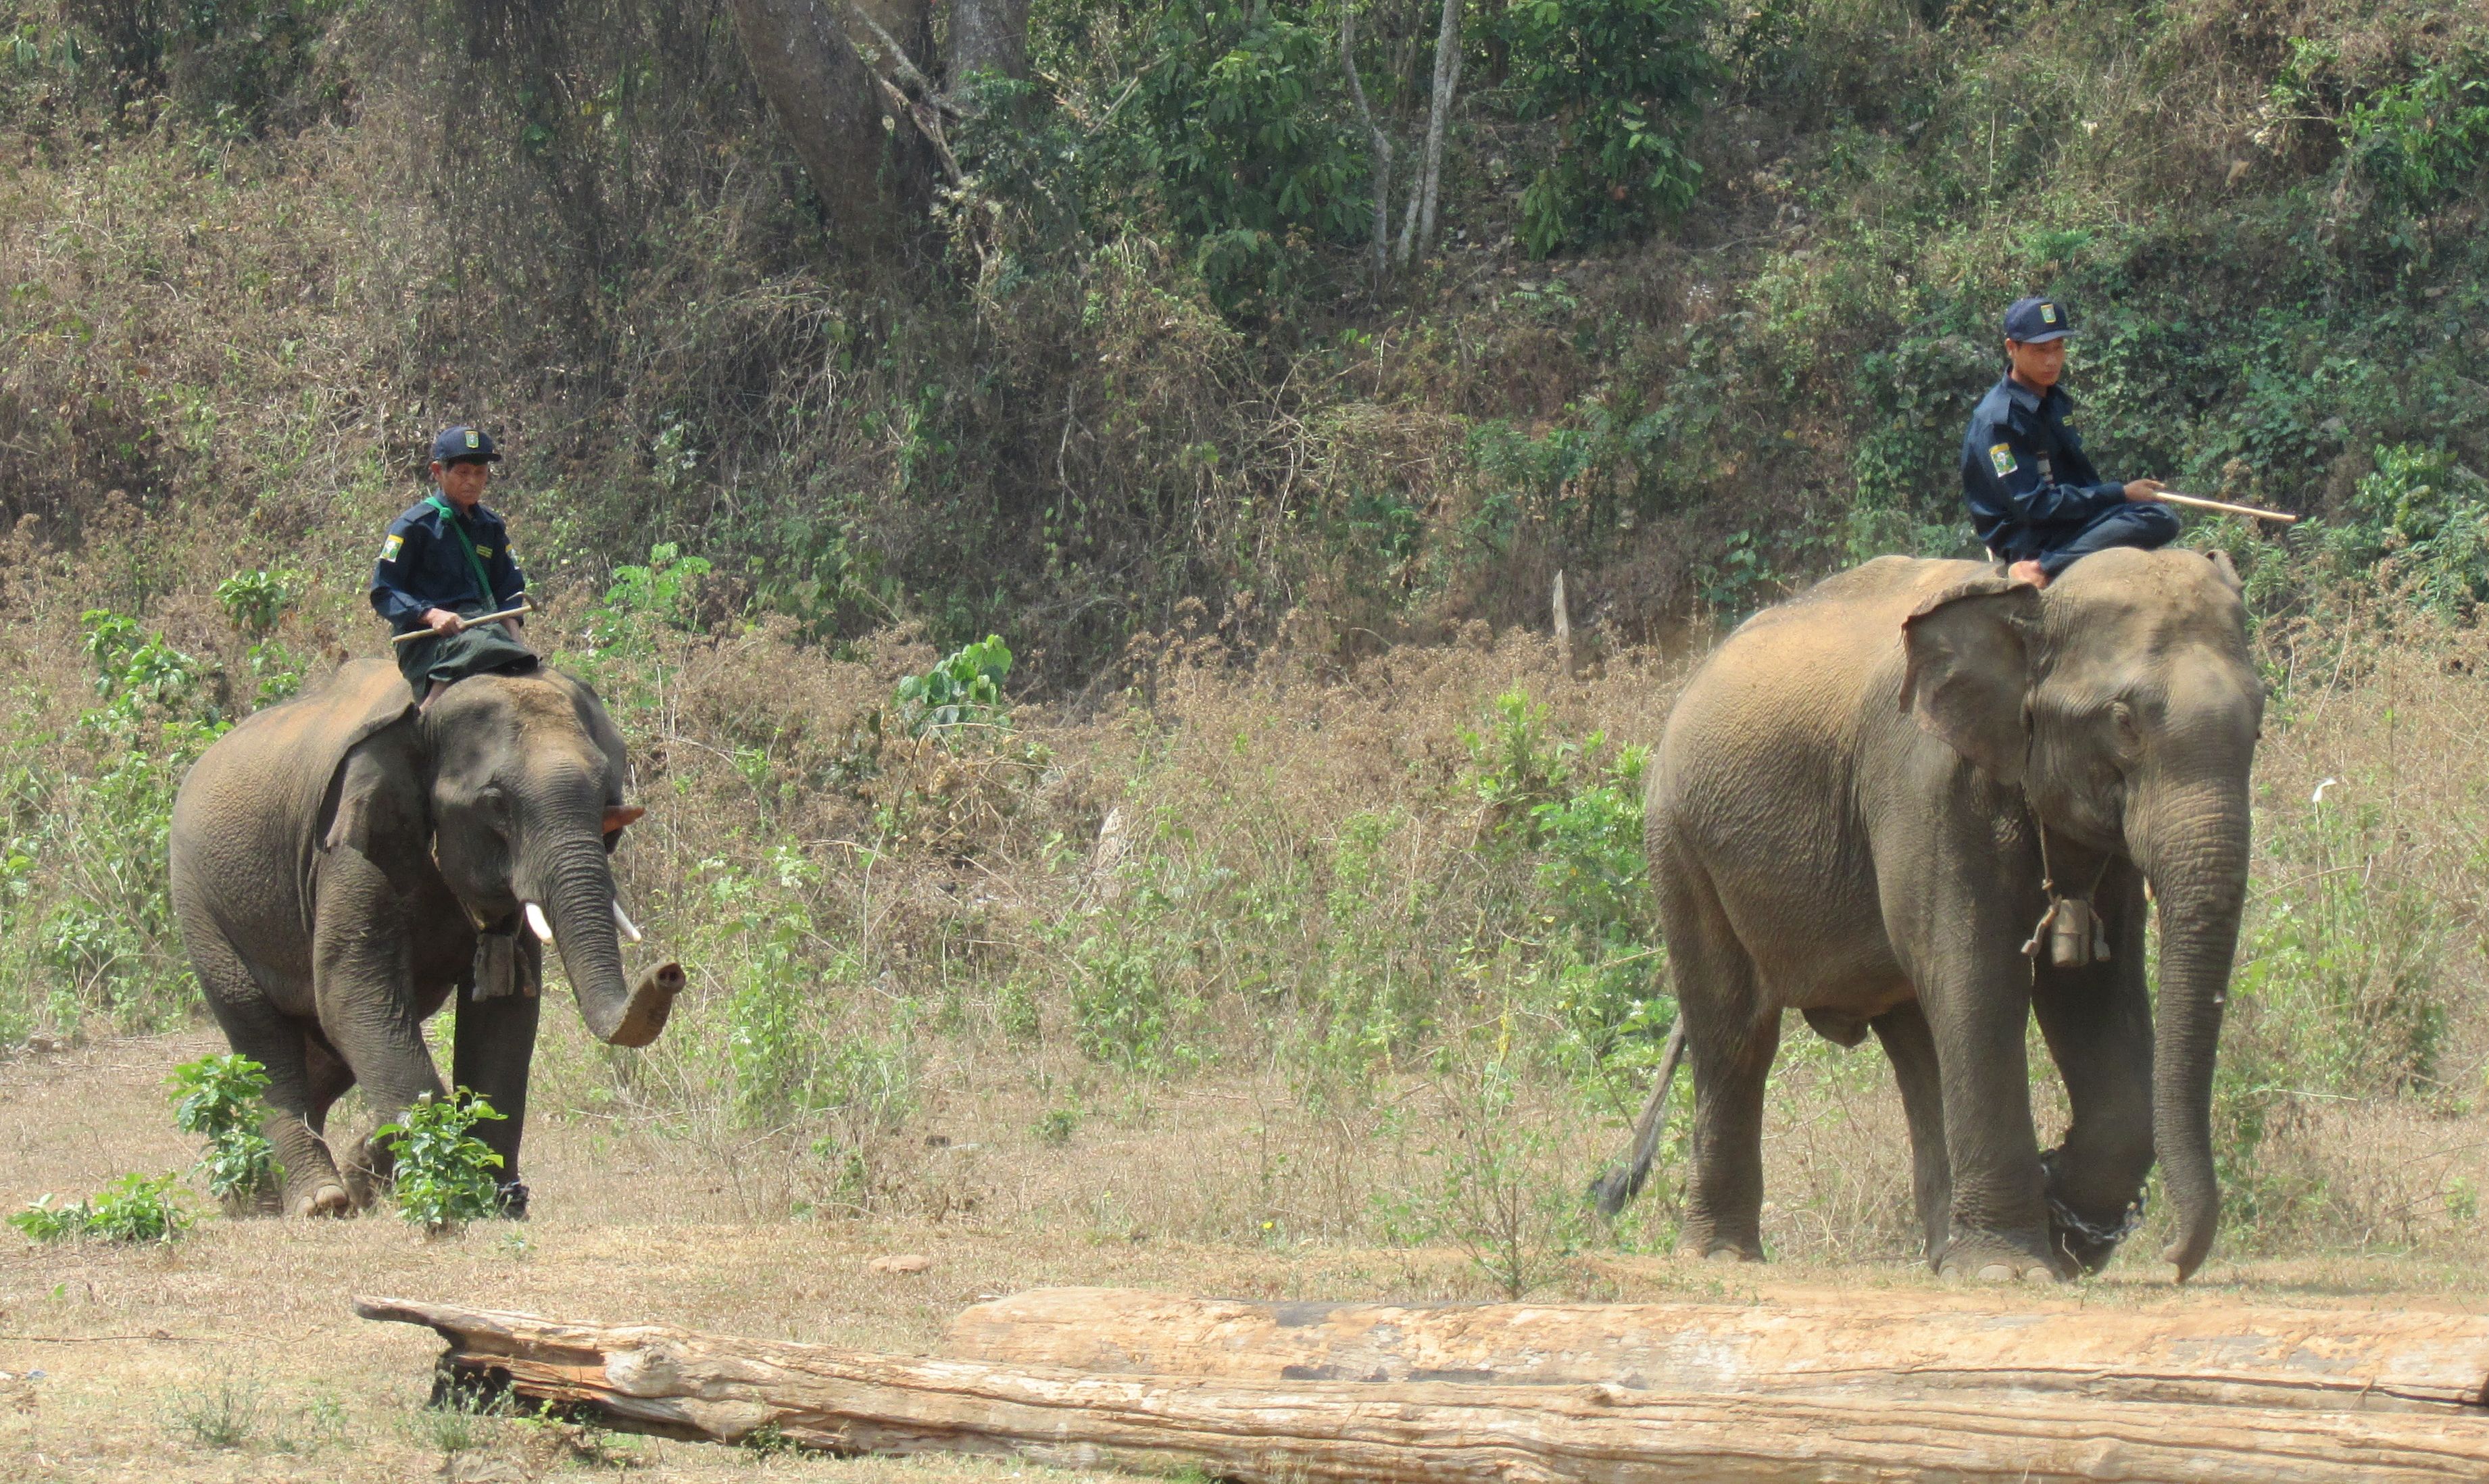 Asian elephants working in Myanmar's timber industry and their mahouts, i.e. elephant riders